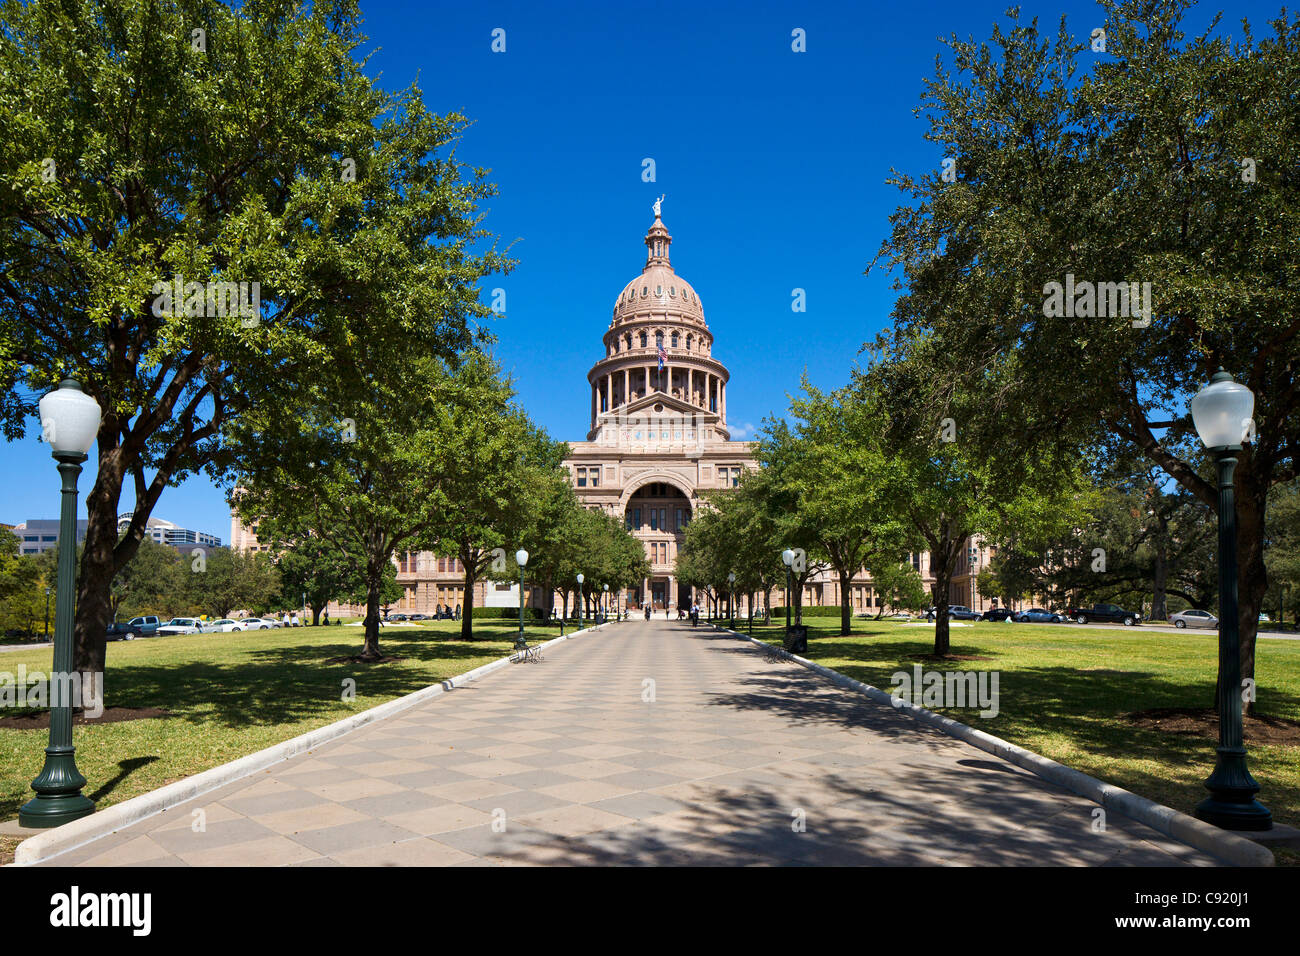 The State Capitol building, Austin, Texas, USA Stock Photo